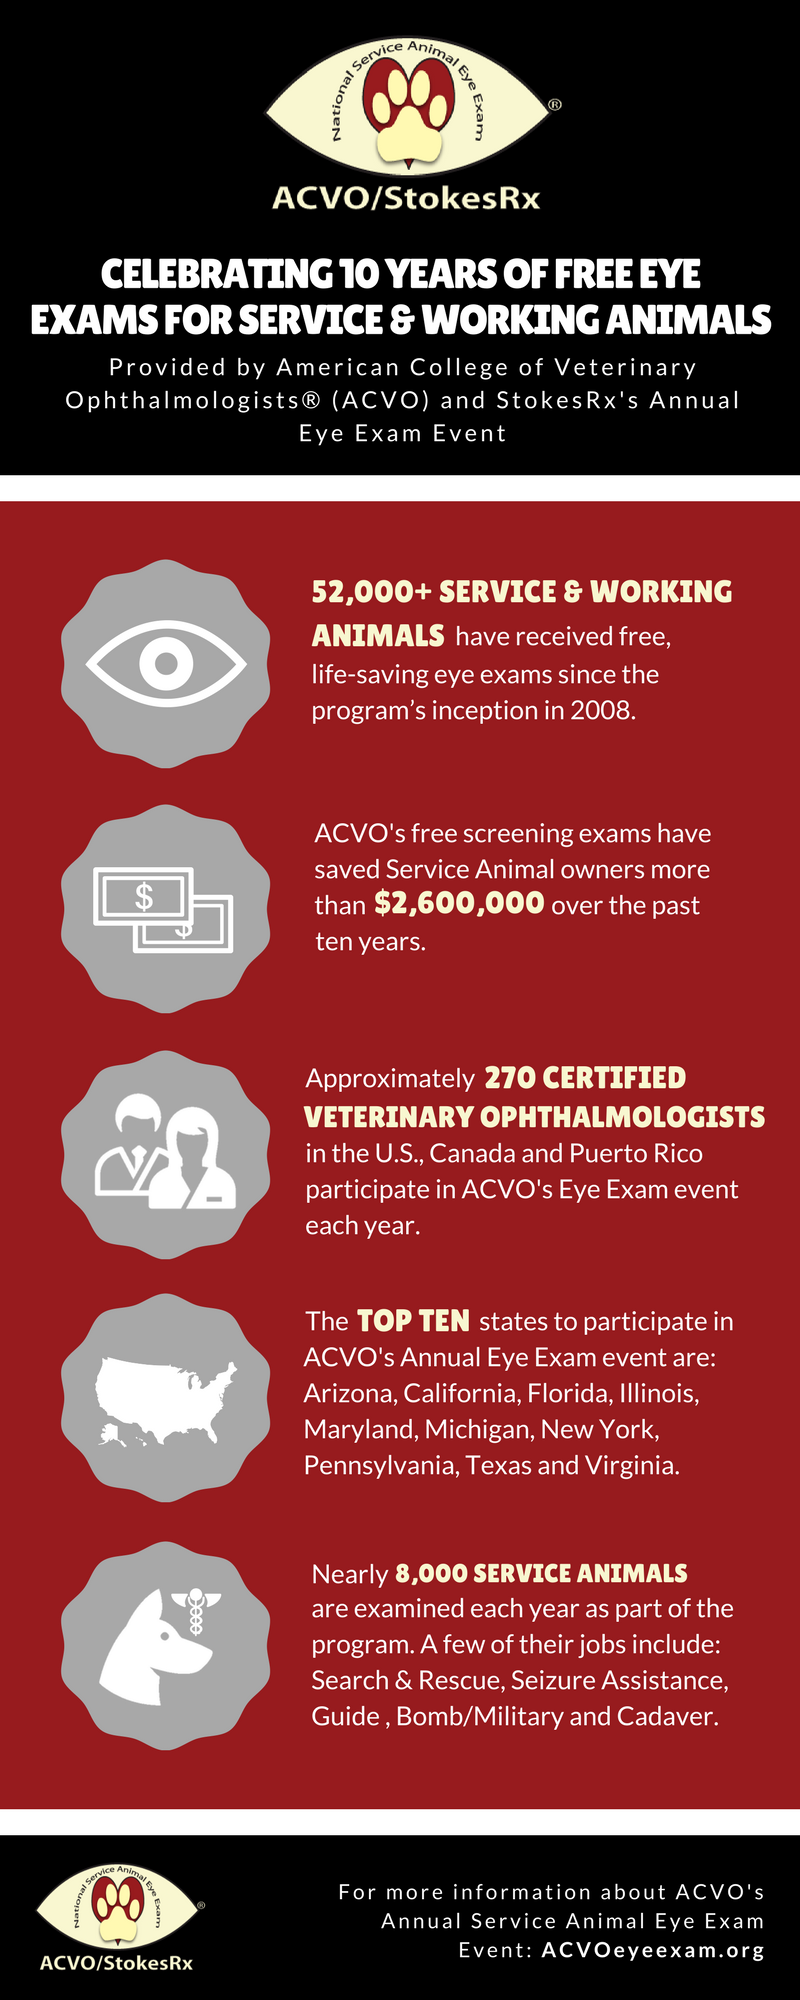 ACVO_10 Year Anniversary Infographic_FINAL_03 20 17.png